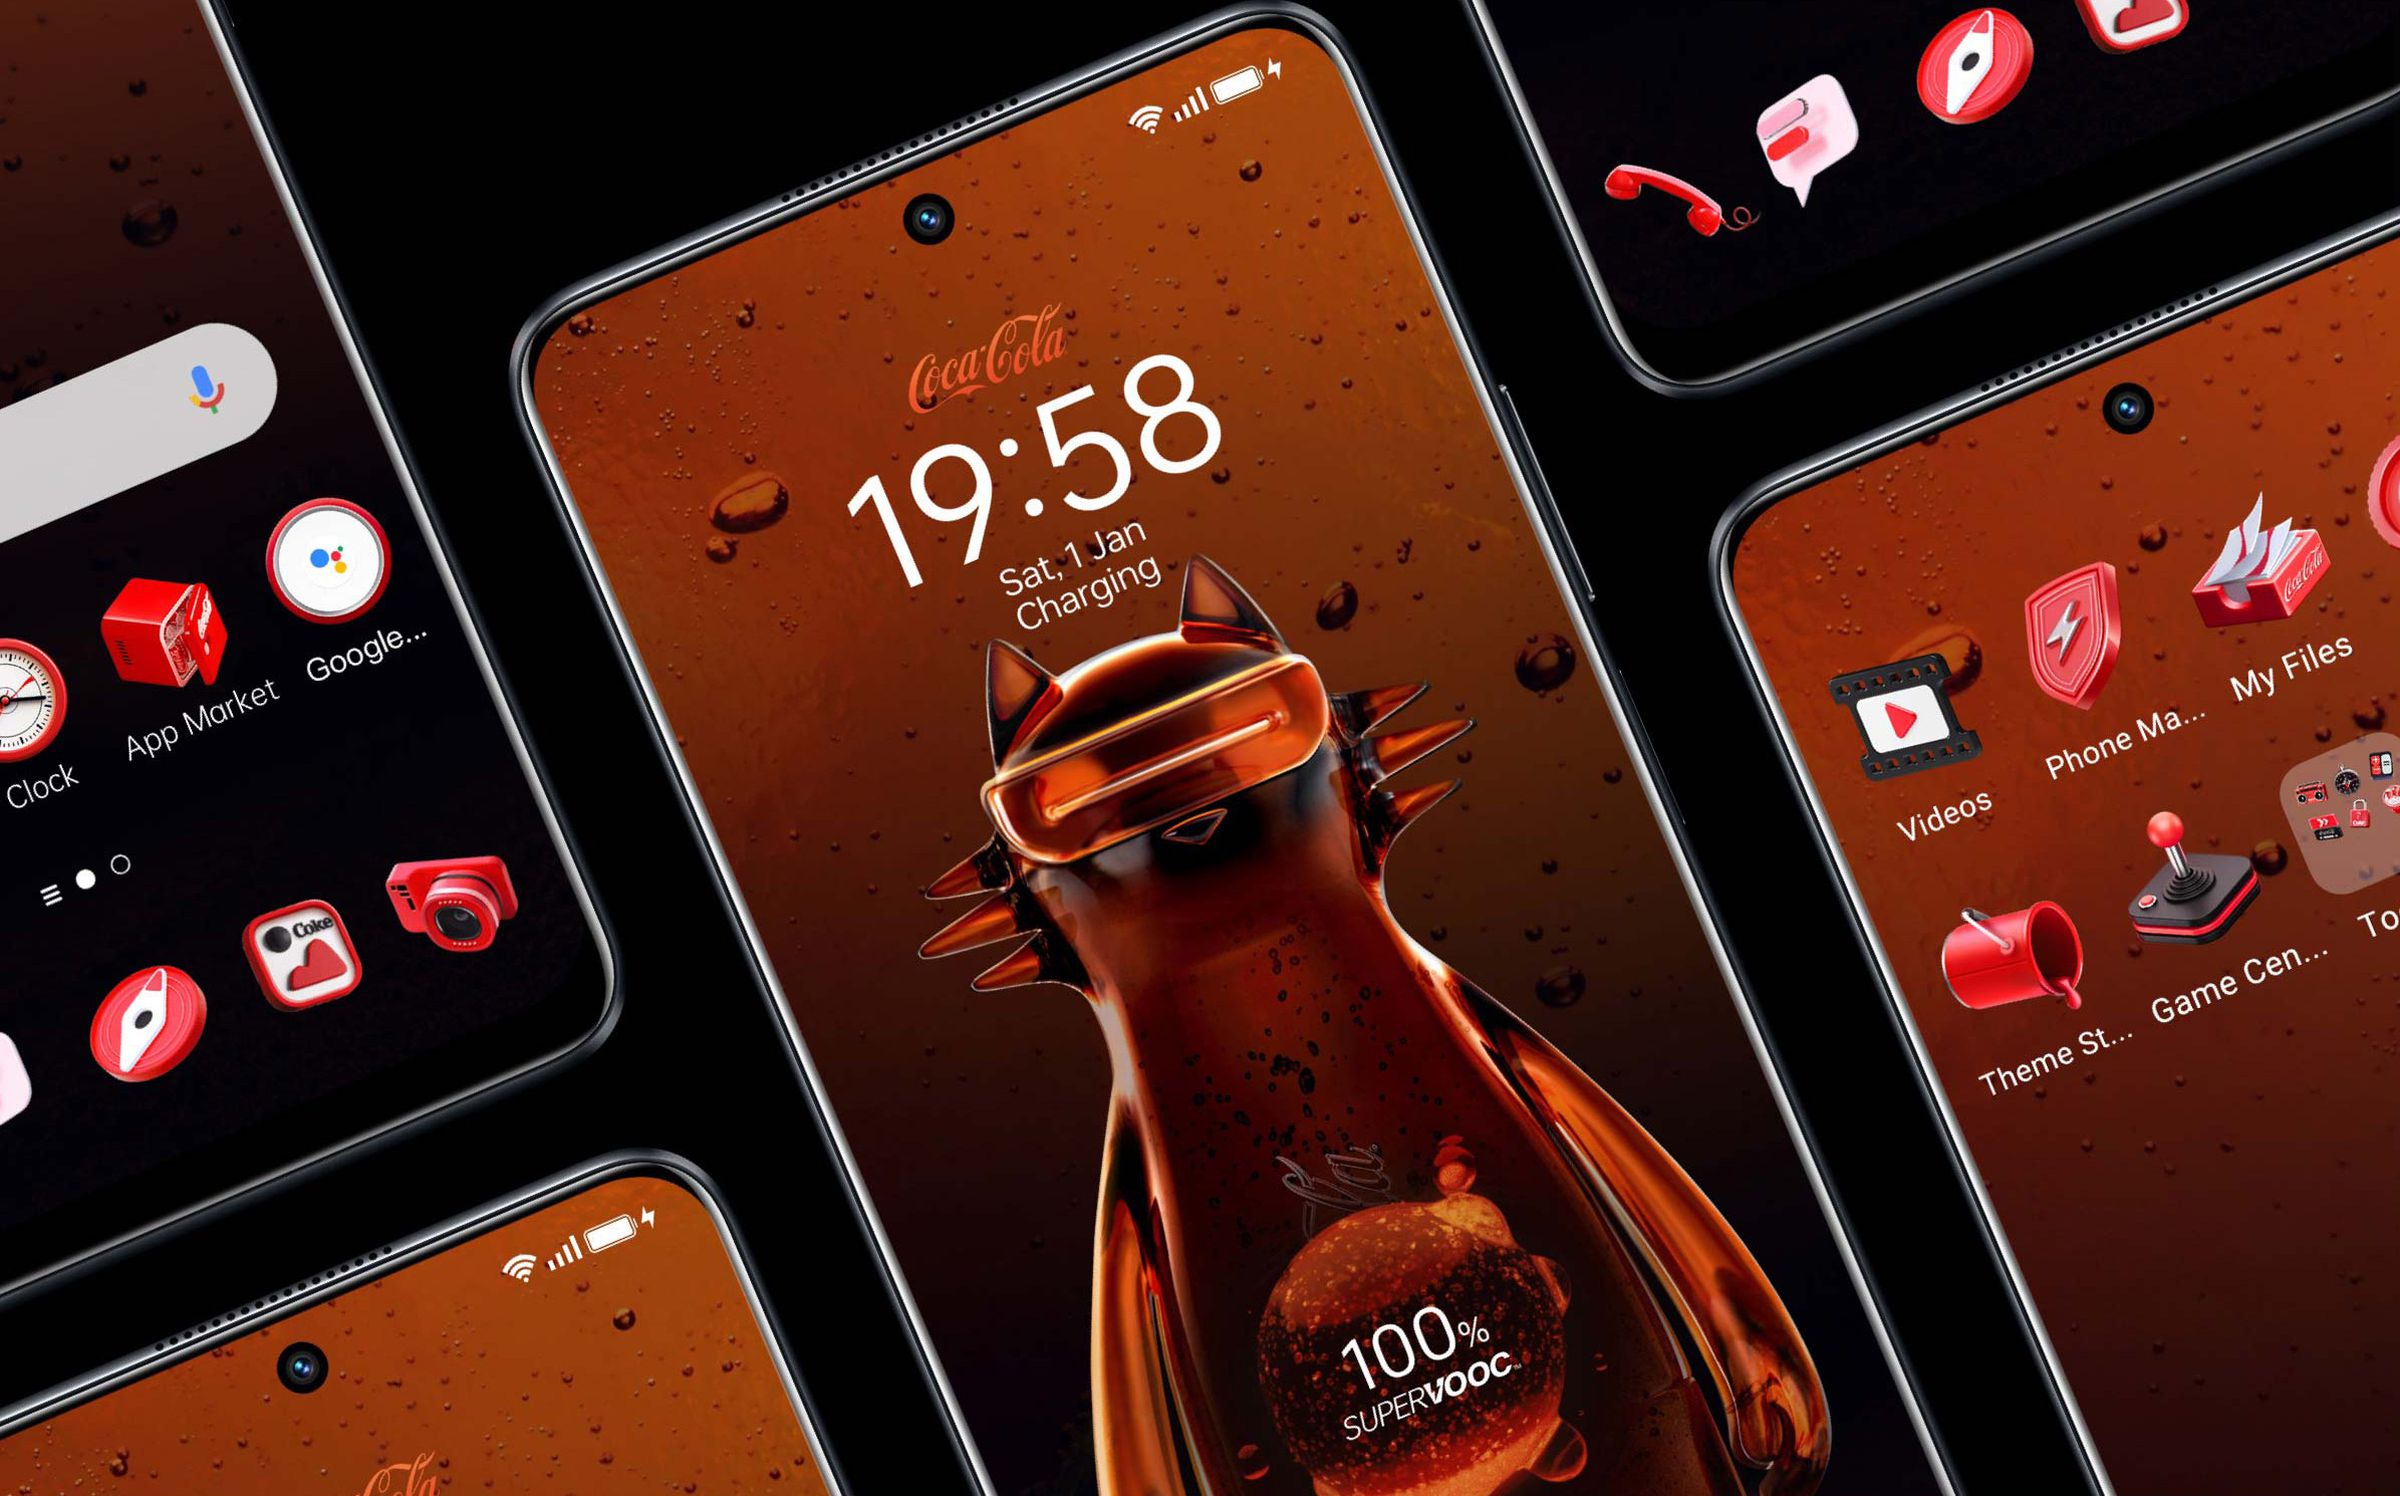 Graphic showing Coke-themed lock screen, app icons and charging animation.